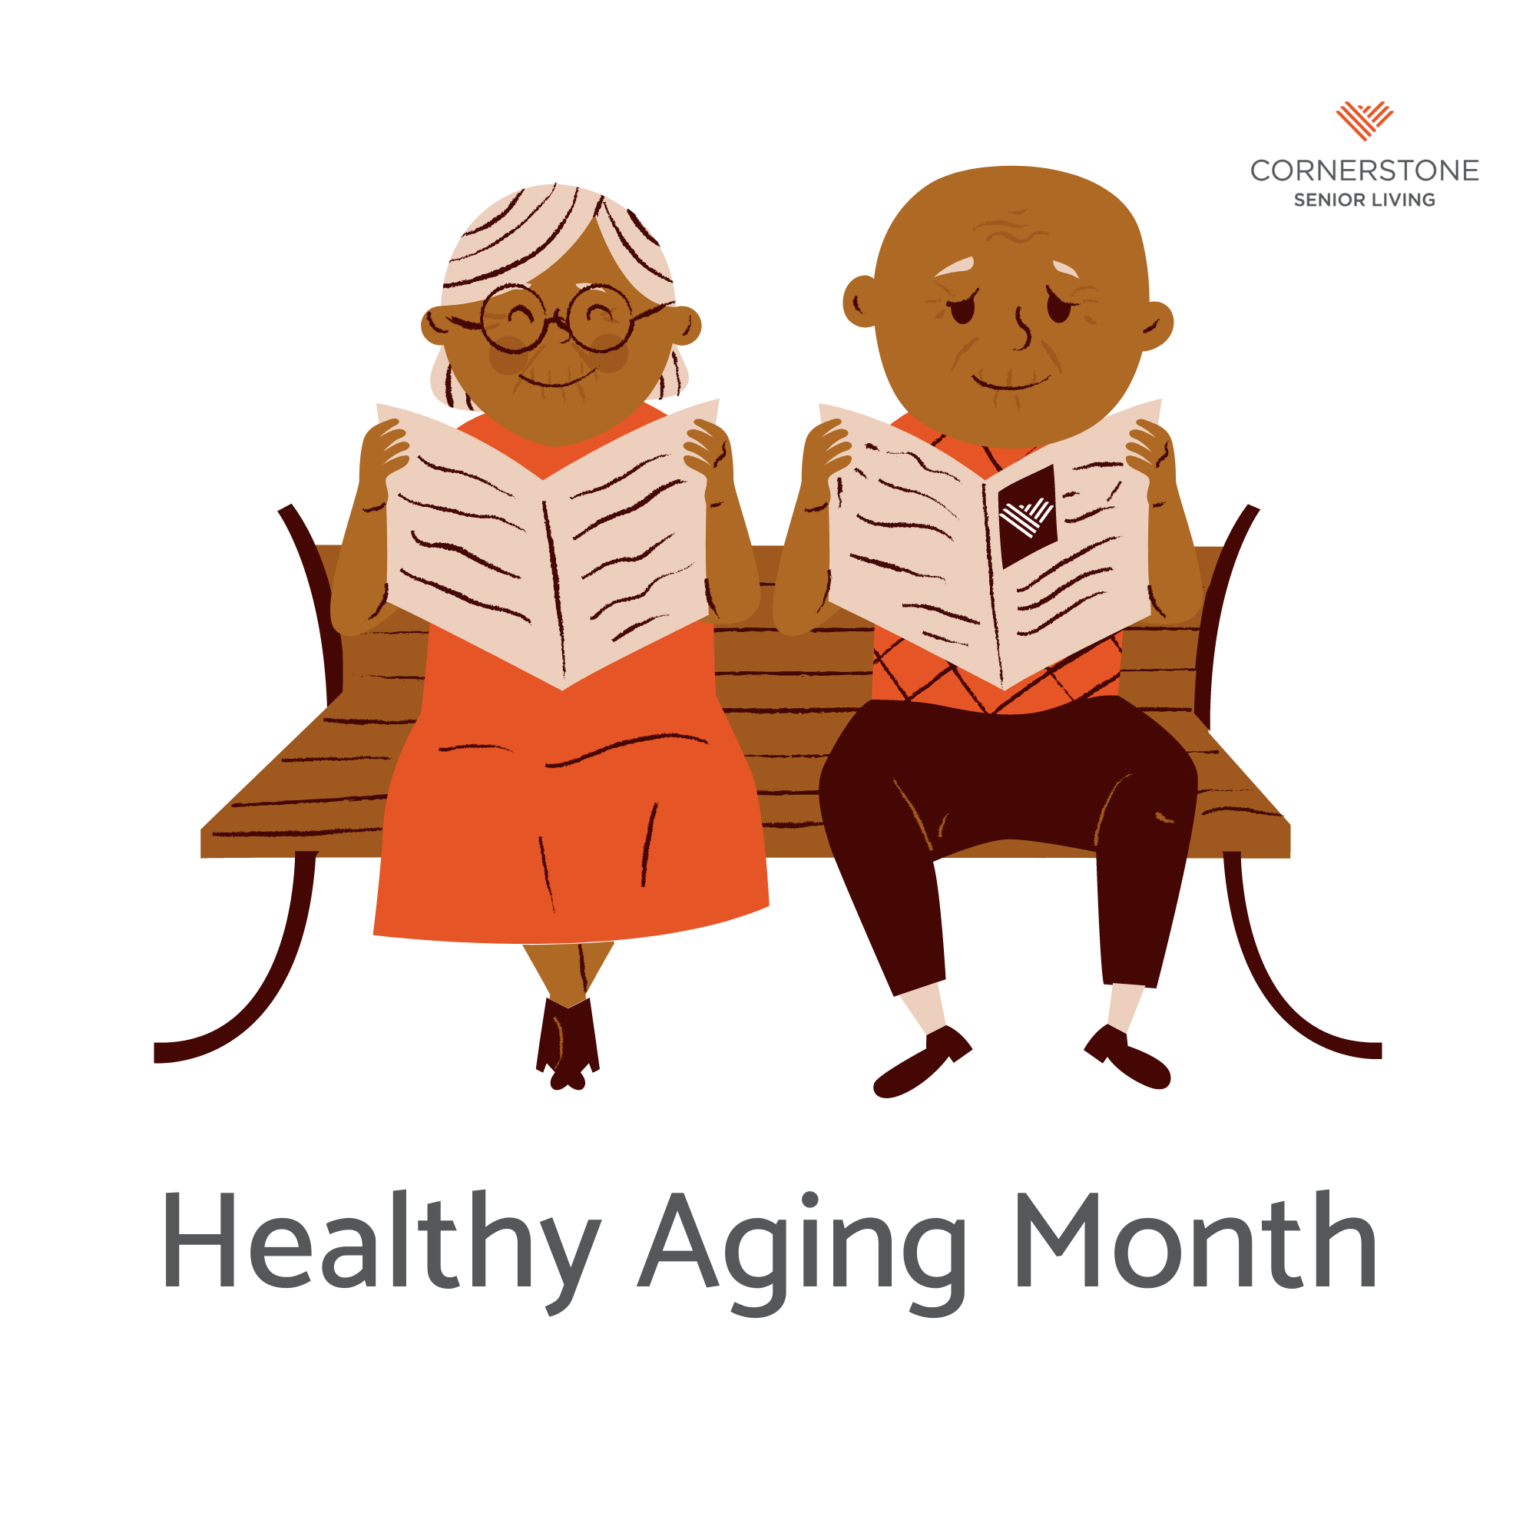 Healthy Aging Month A Time to Prioritize Your Health